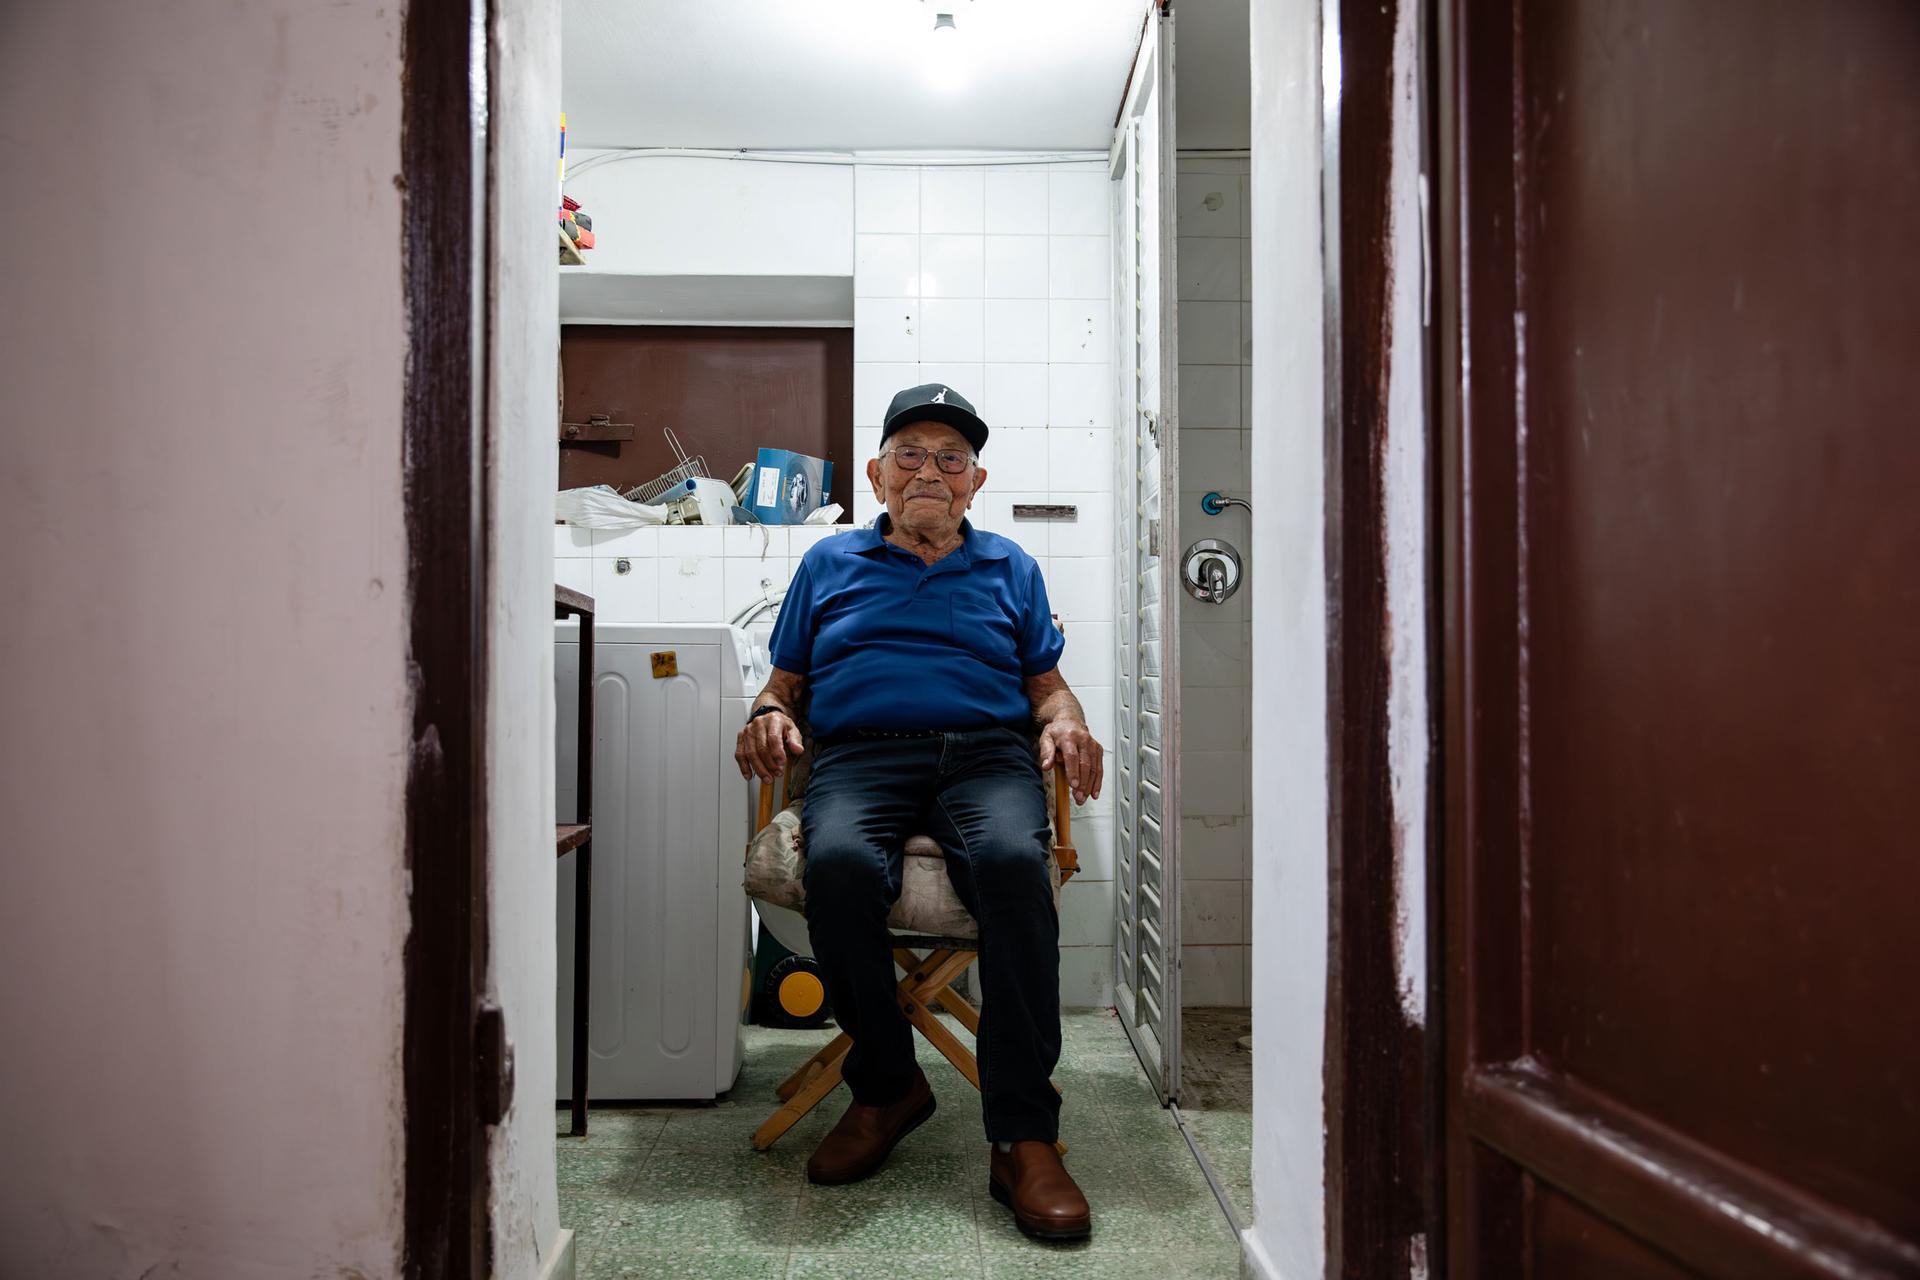 Isaiah Foyer, 90, at his home in Ashkelon, Israel. He has decided to stay in his home that was damaged by Hamas rockets.